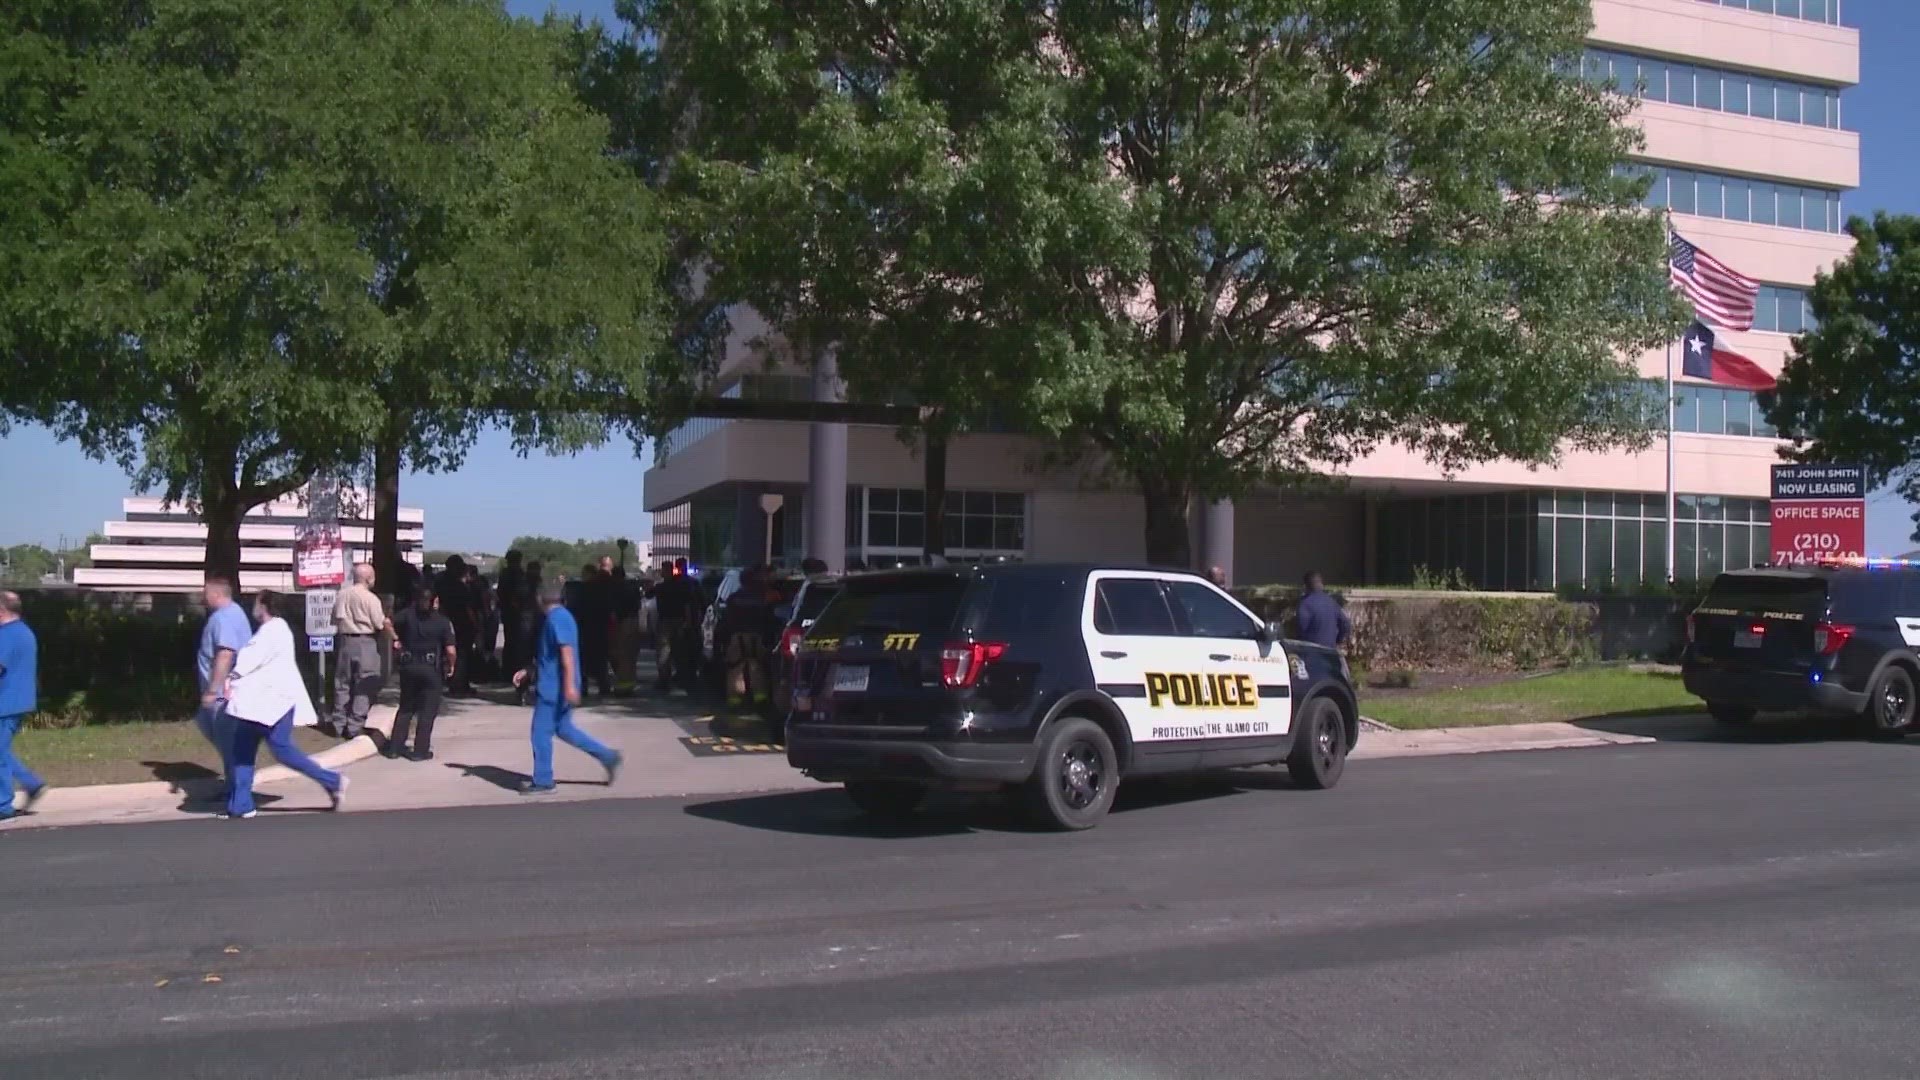 An apparent hoax call led to a mass evacuation Thursday morning at a nursing school in San Antonio, police confirmed.